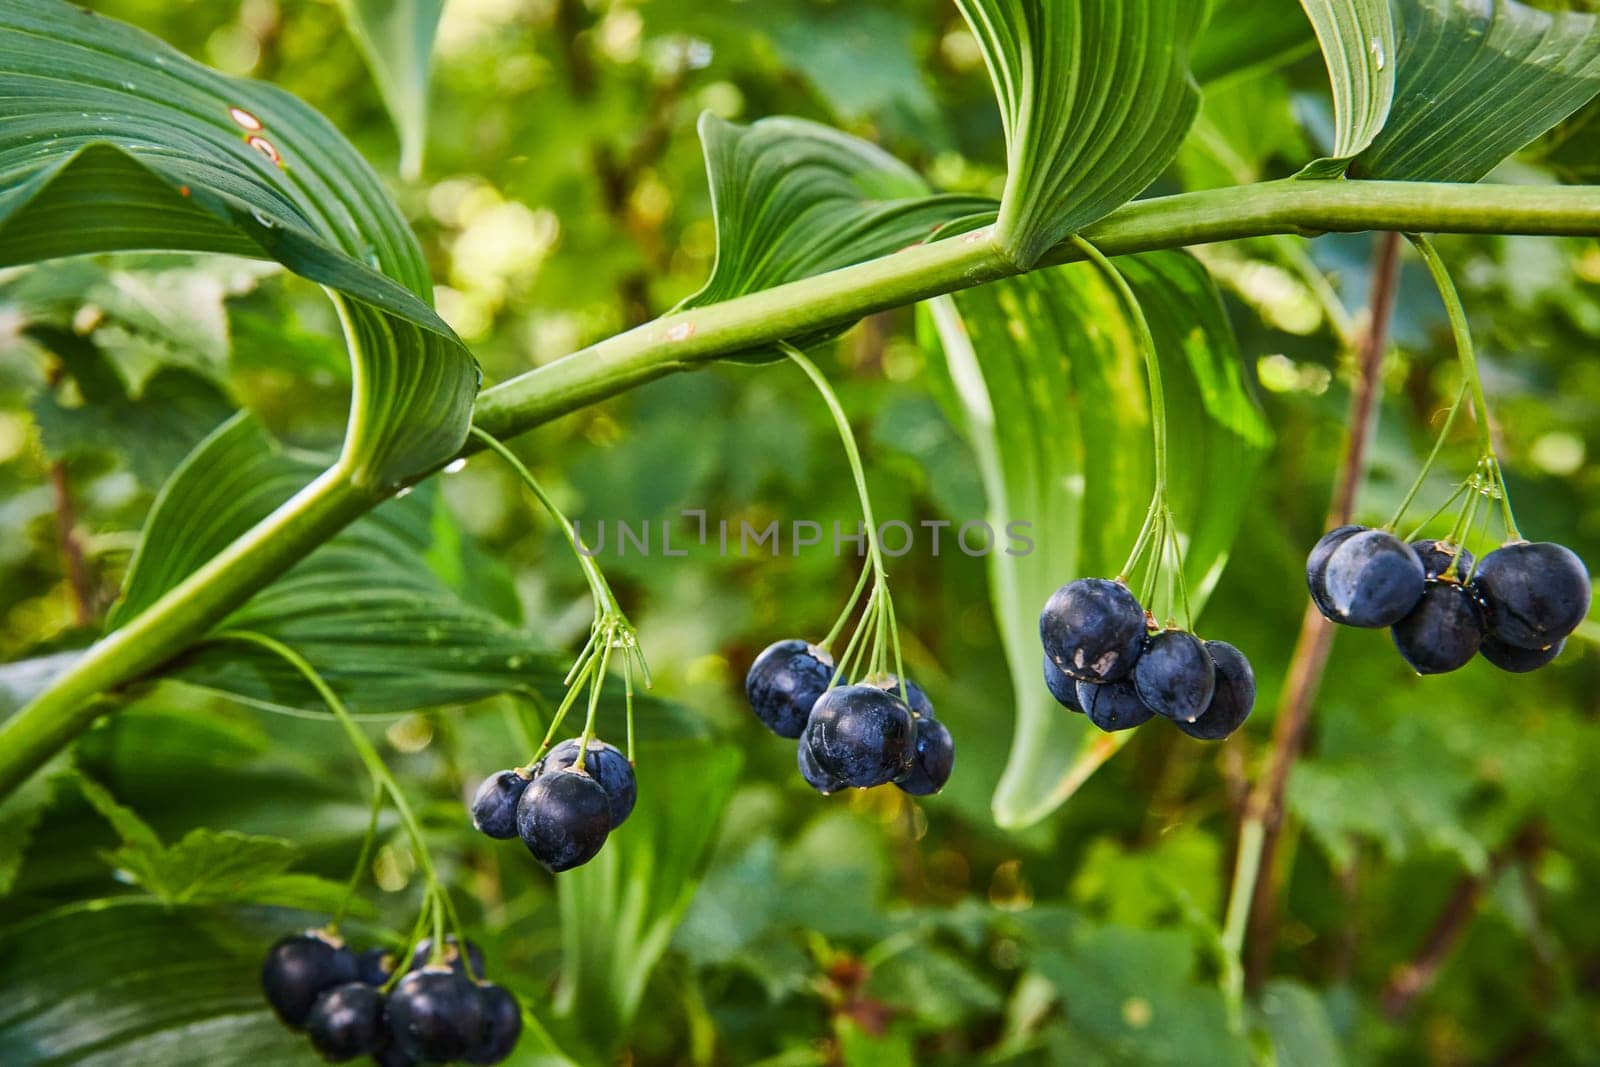 Ripe Blueberries Cluster on Plant with Glossy Leaves by njproductions